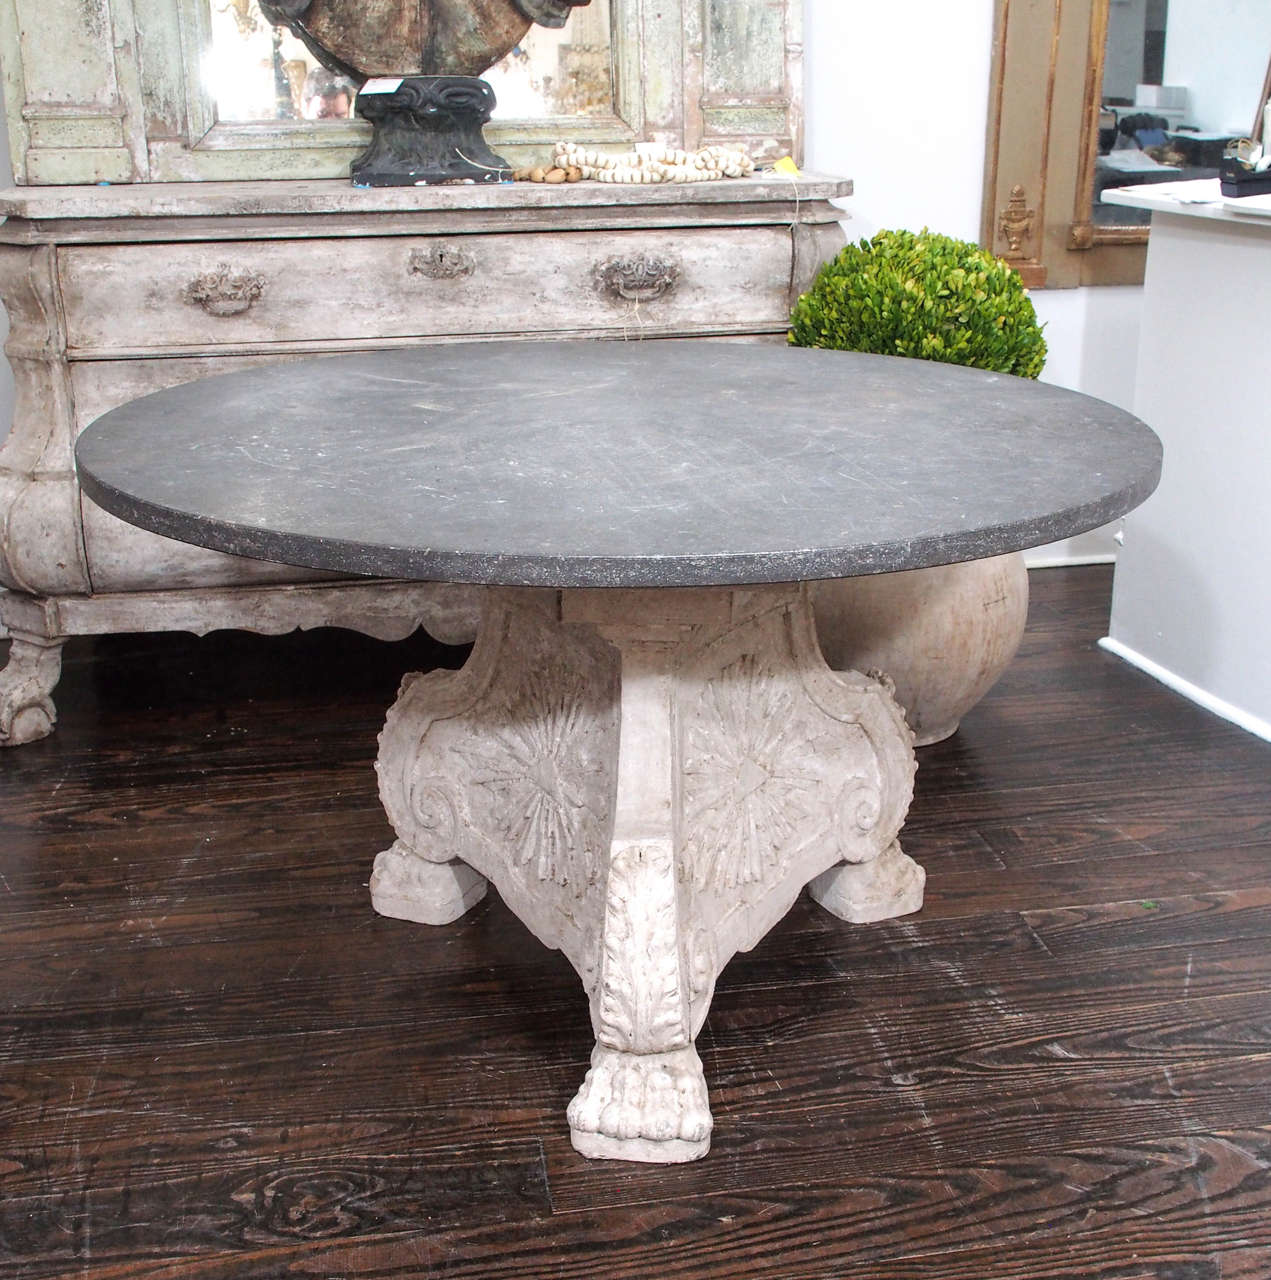 19th century carved and painted Italian blue stone center table with claw feet.